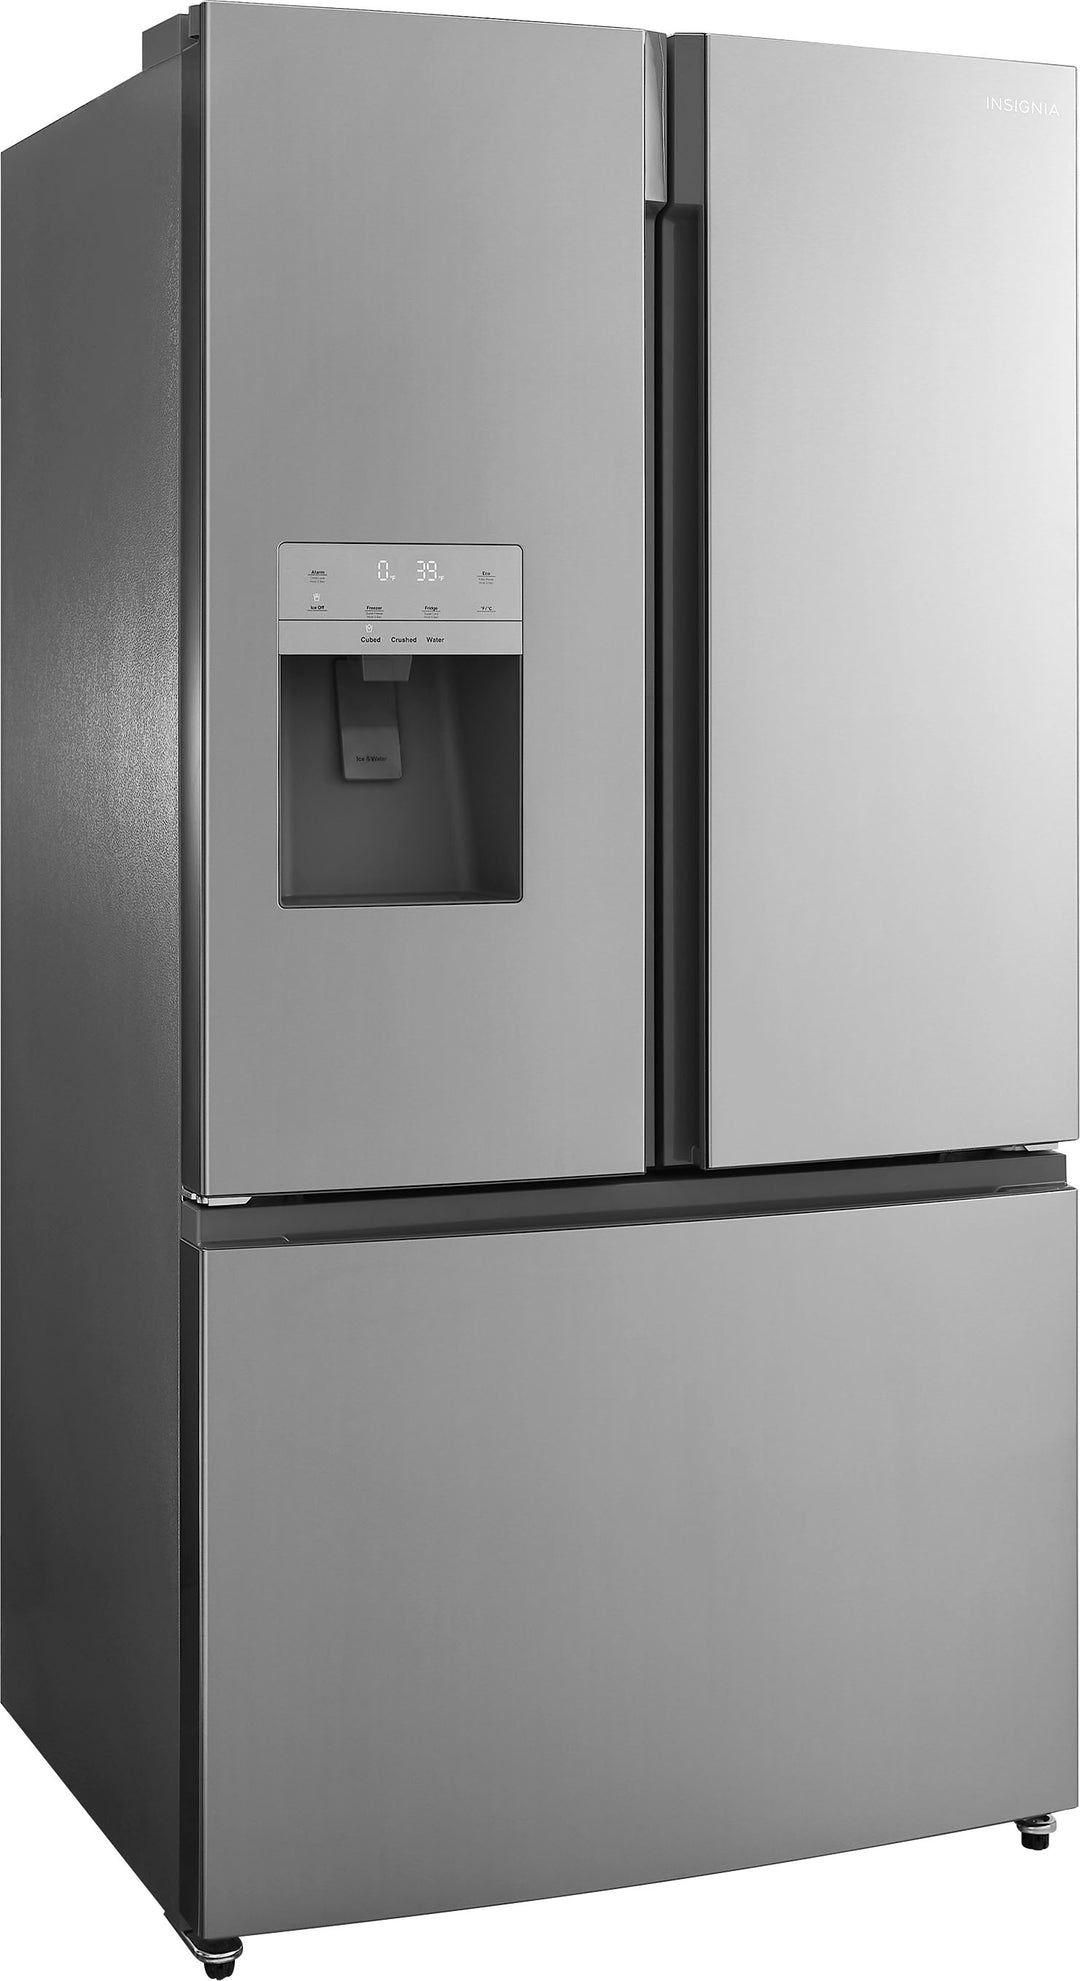 Insignia™ - 25.4 Cu. Ft. French Door Refrigerator - Stainless steel_1